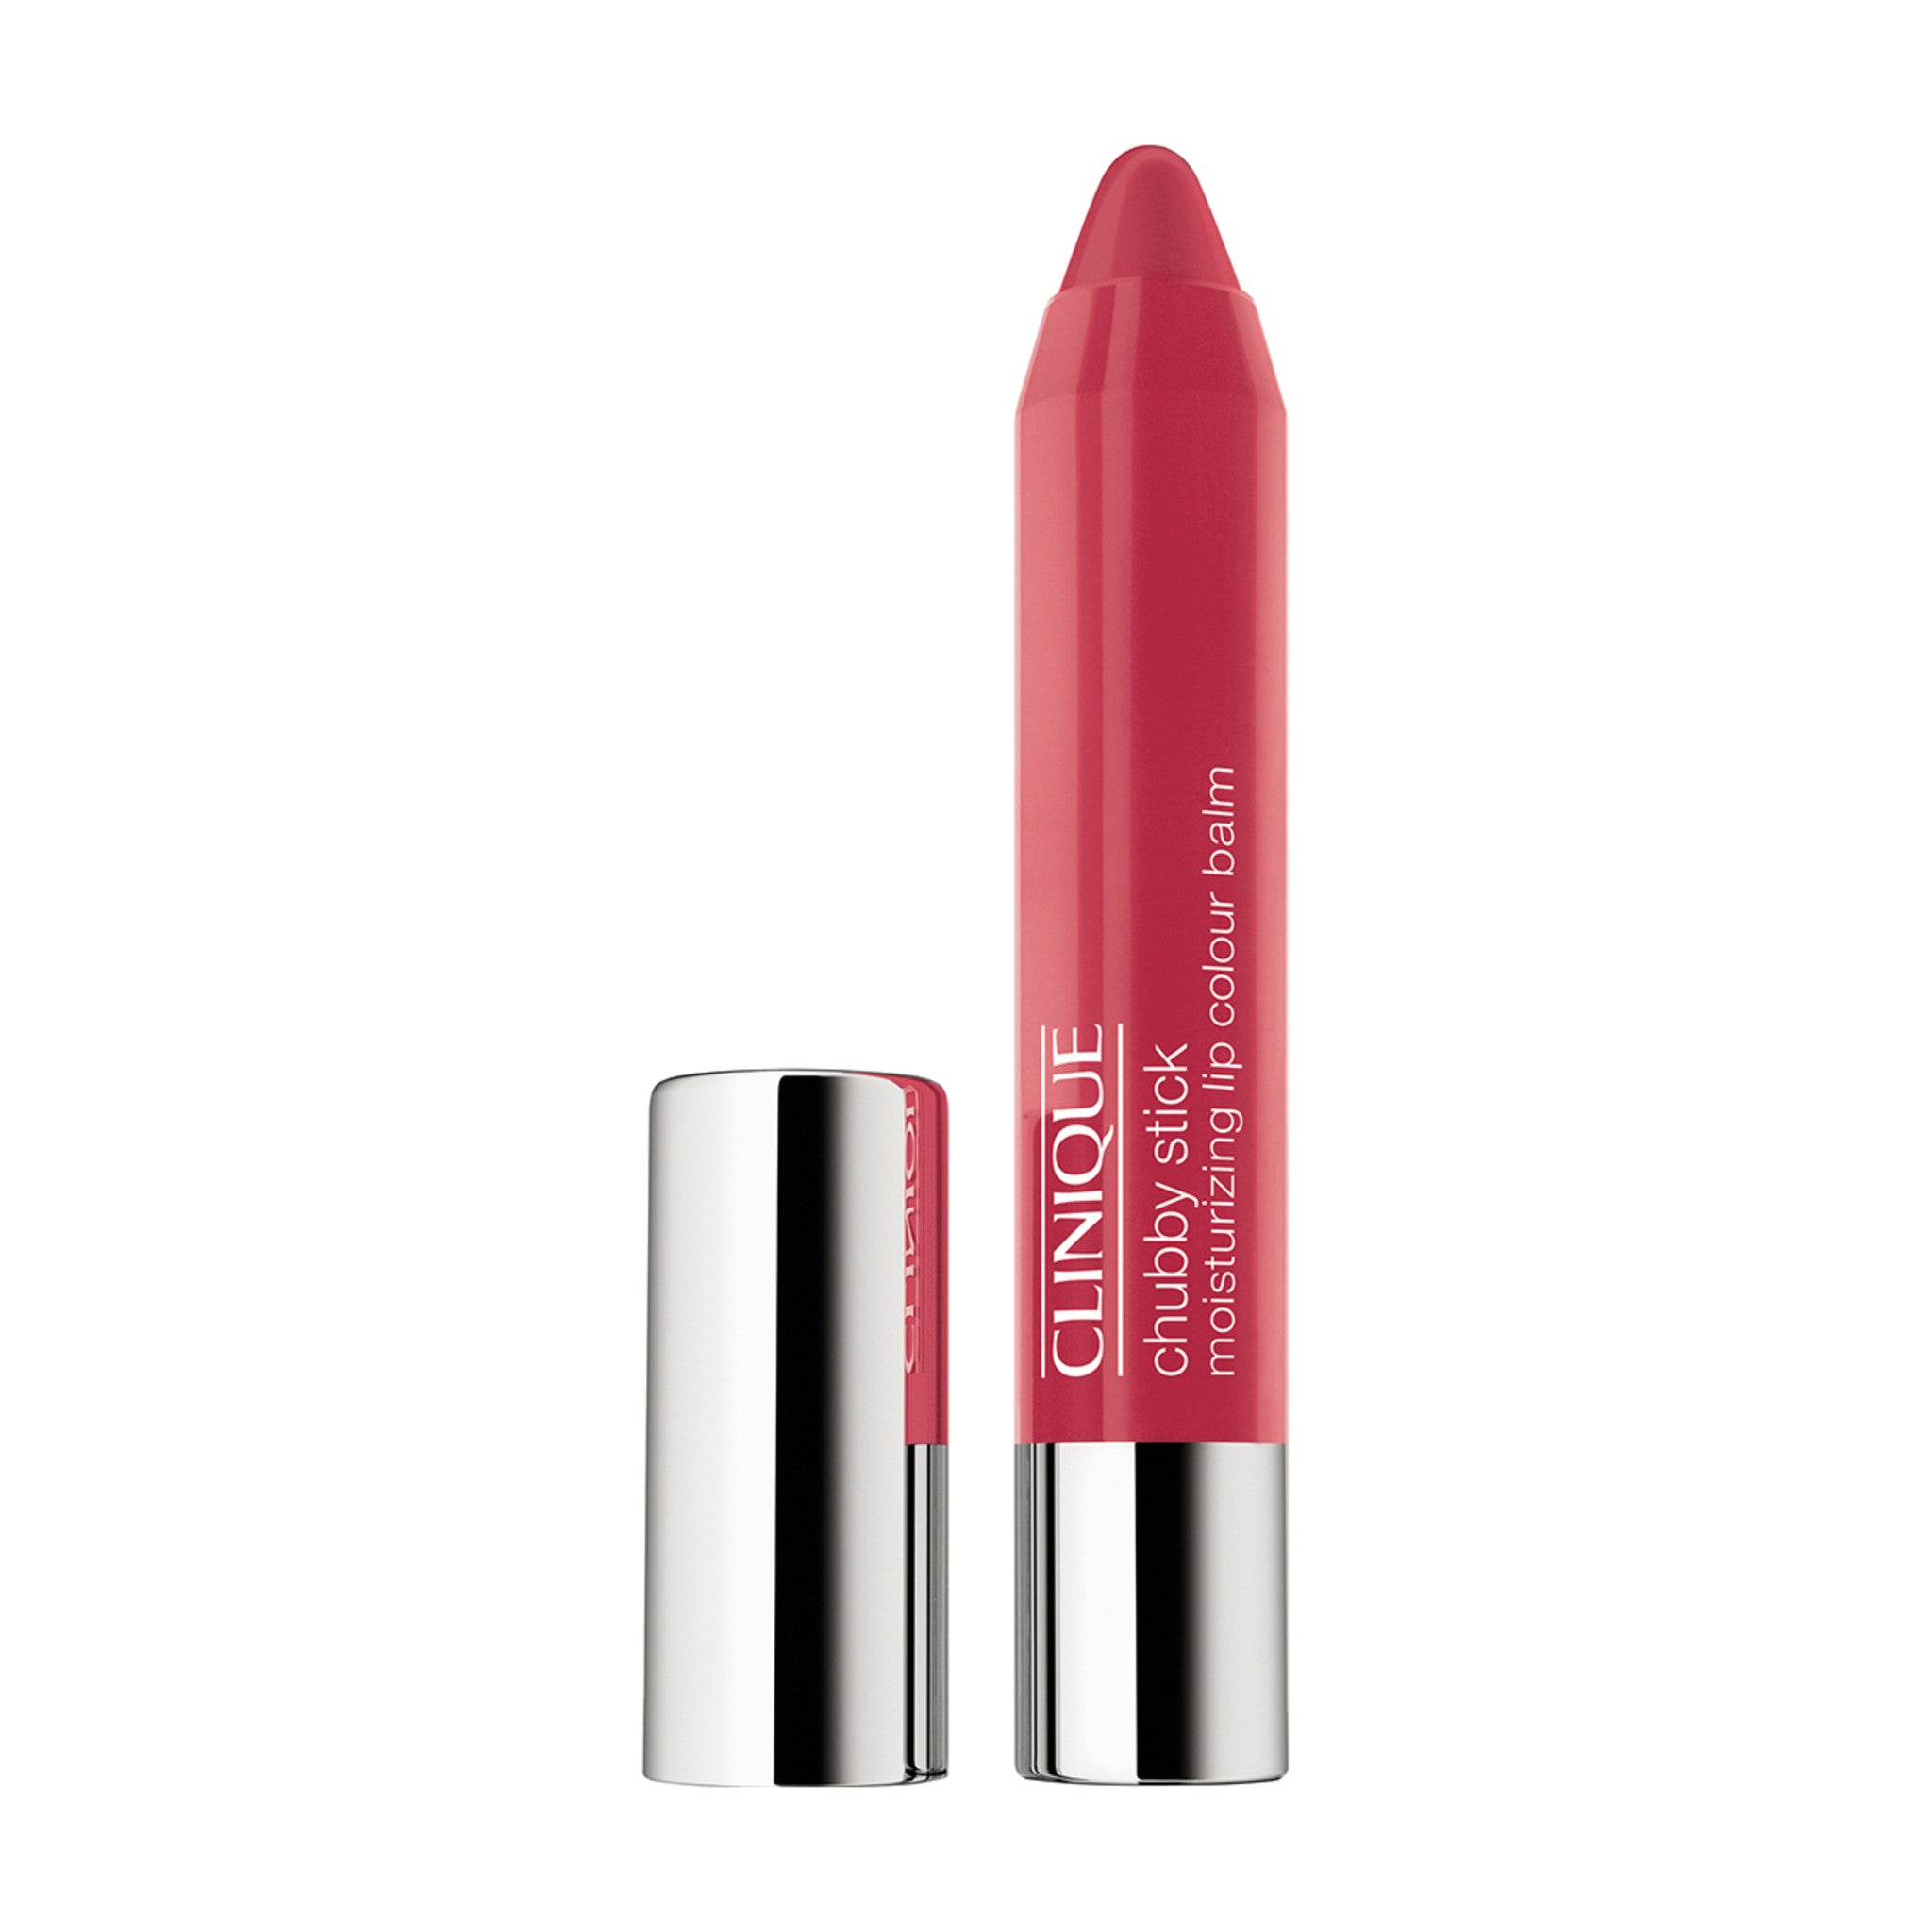 Clinique Chubby Stick Moisturizing Lip Colour Balm Color/Shade variant: MIGHTY MIMOSA main image.